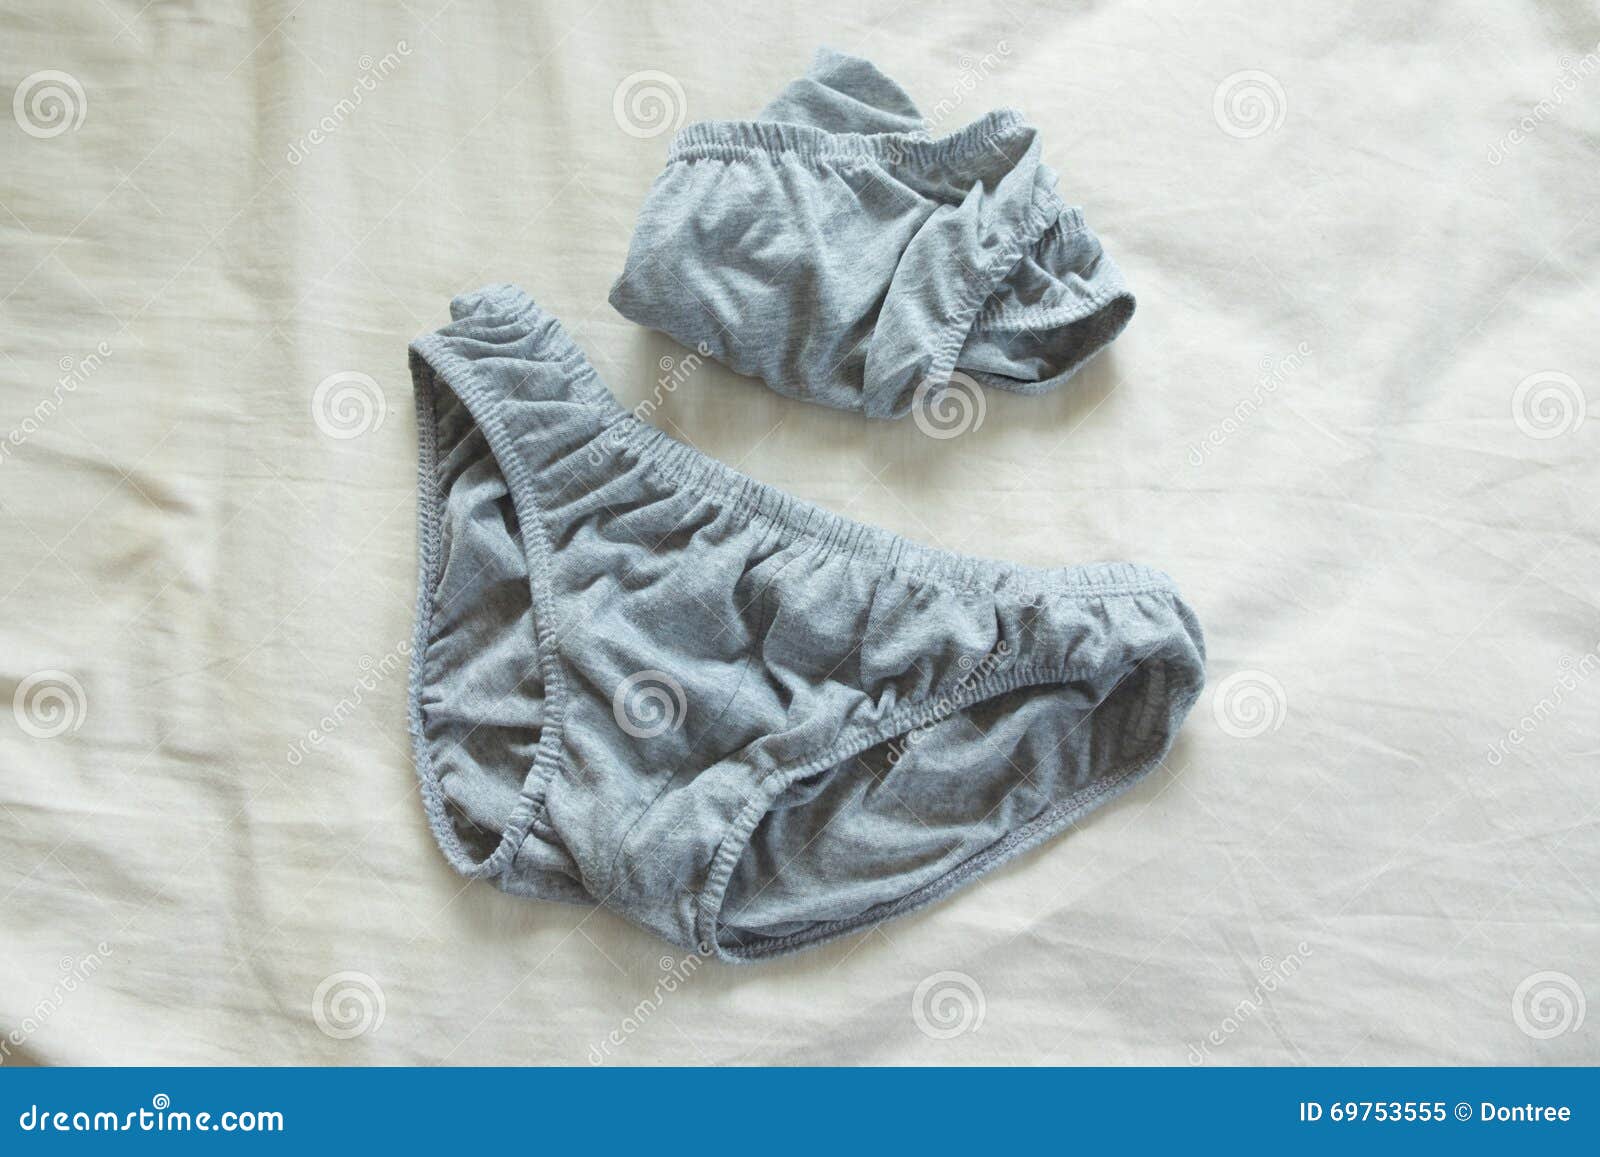 Male underpants grey color stock image. Image of burlap - 69753555